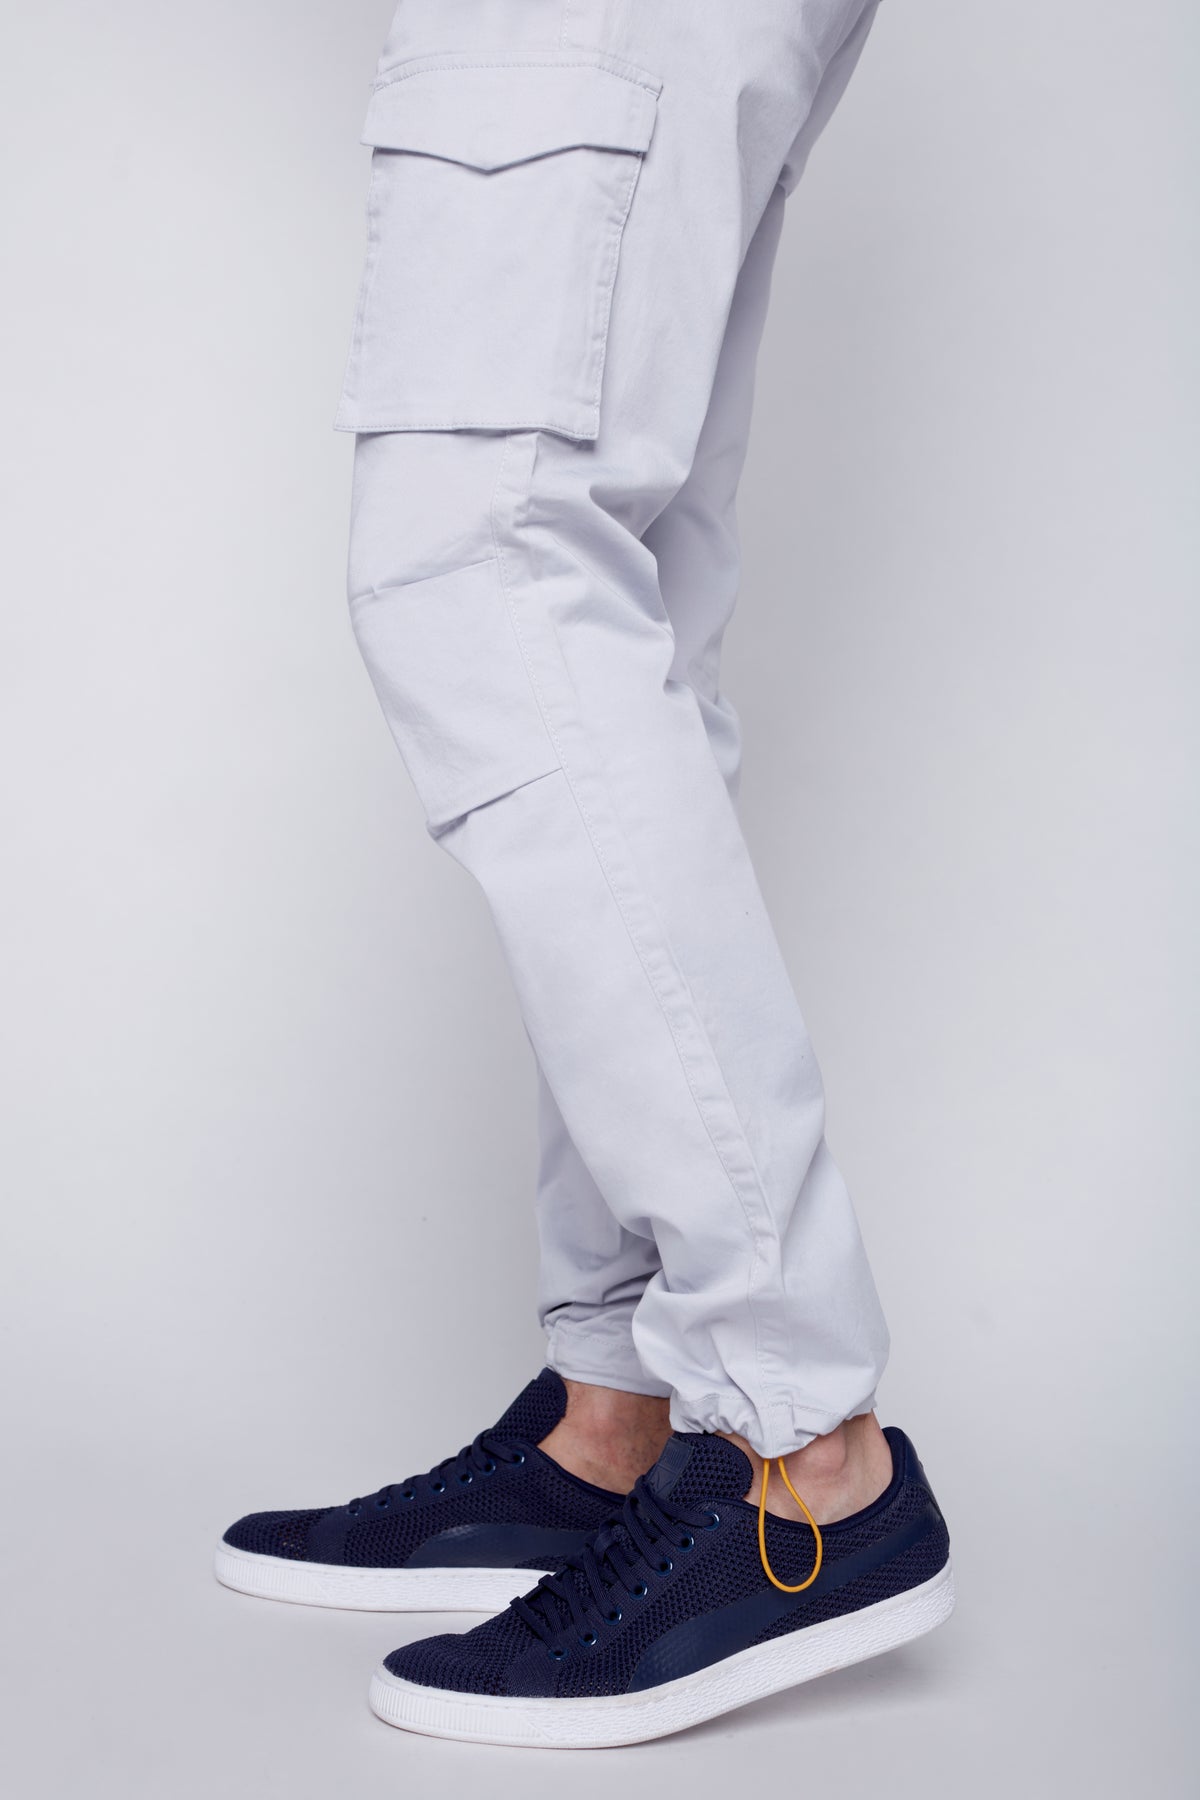 DEAN -  Slim Fit Cargo Chinos (Convertible Joggers) - Frost Blue